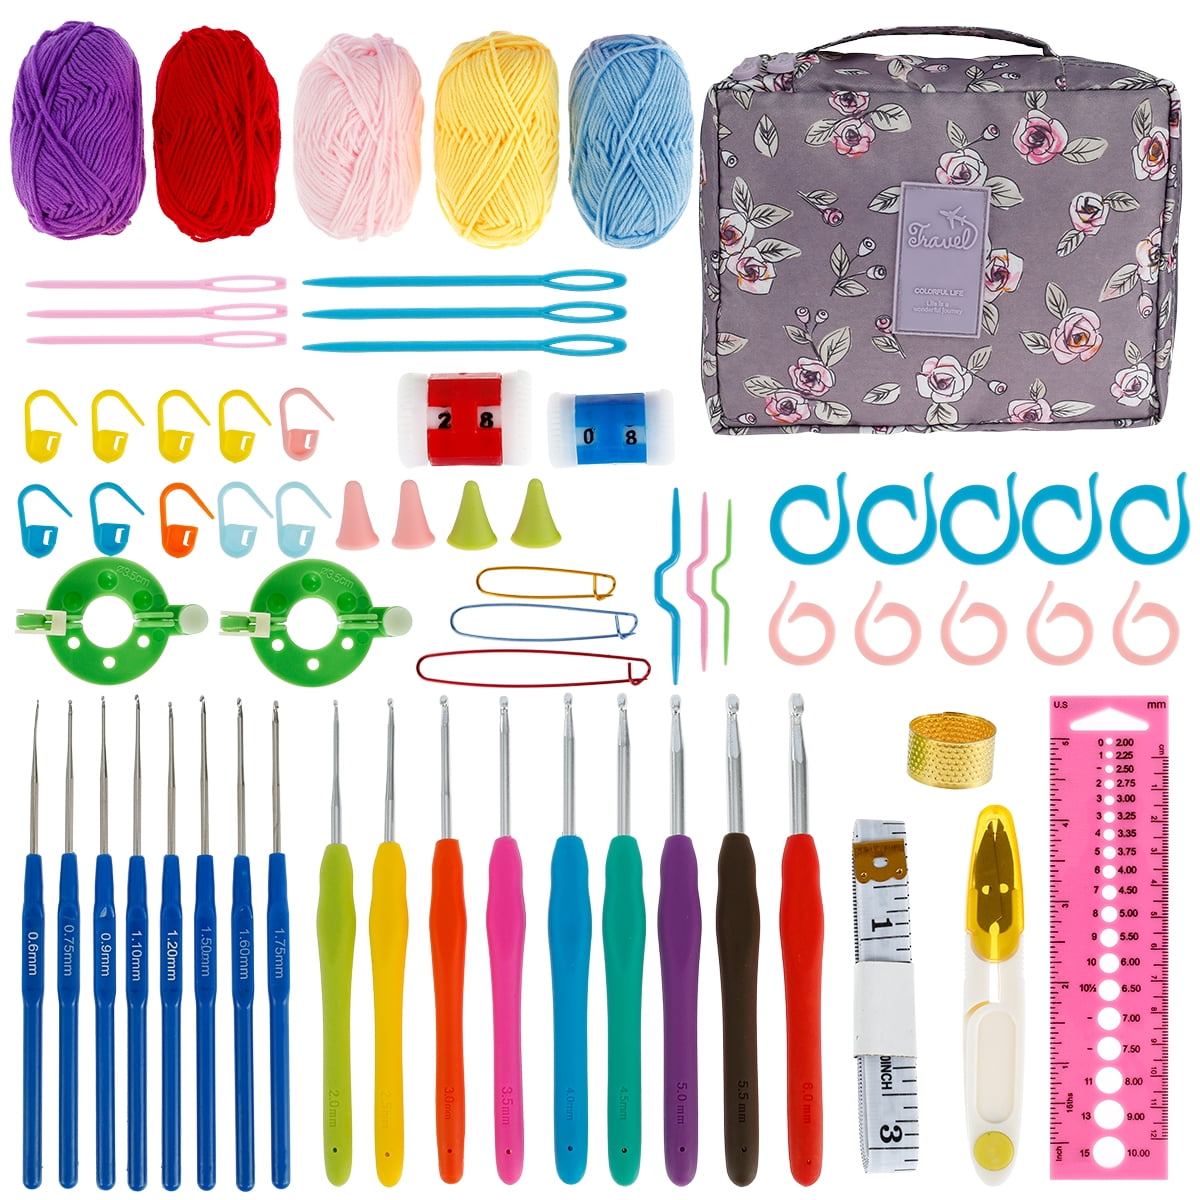 Qenwkxz 66pcs Crochet Kits for Beginners Colorful Crochet Hook Set with  Storage Bag and Crochet Accessories Ergonomic Crochet Kit Practical  Knitting Starter Kit for Adults Kids Gifts 